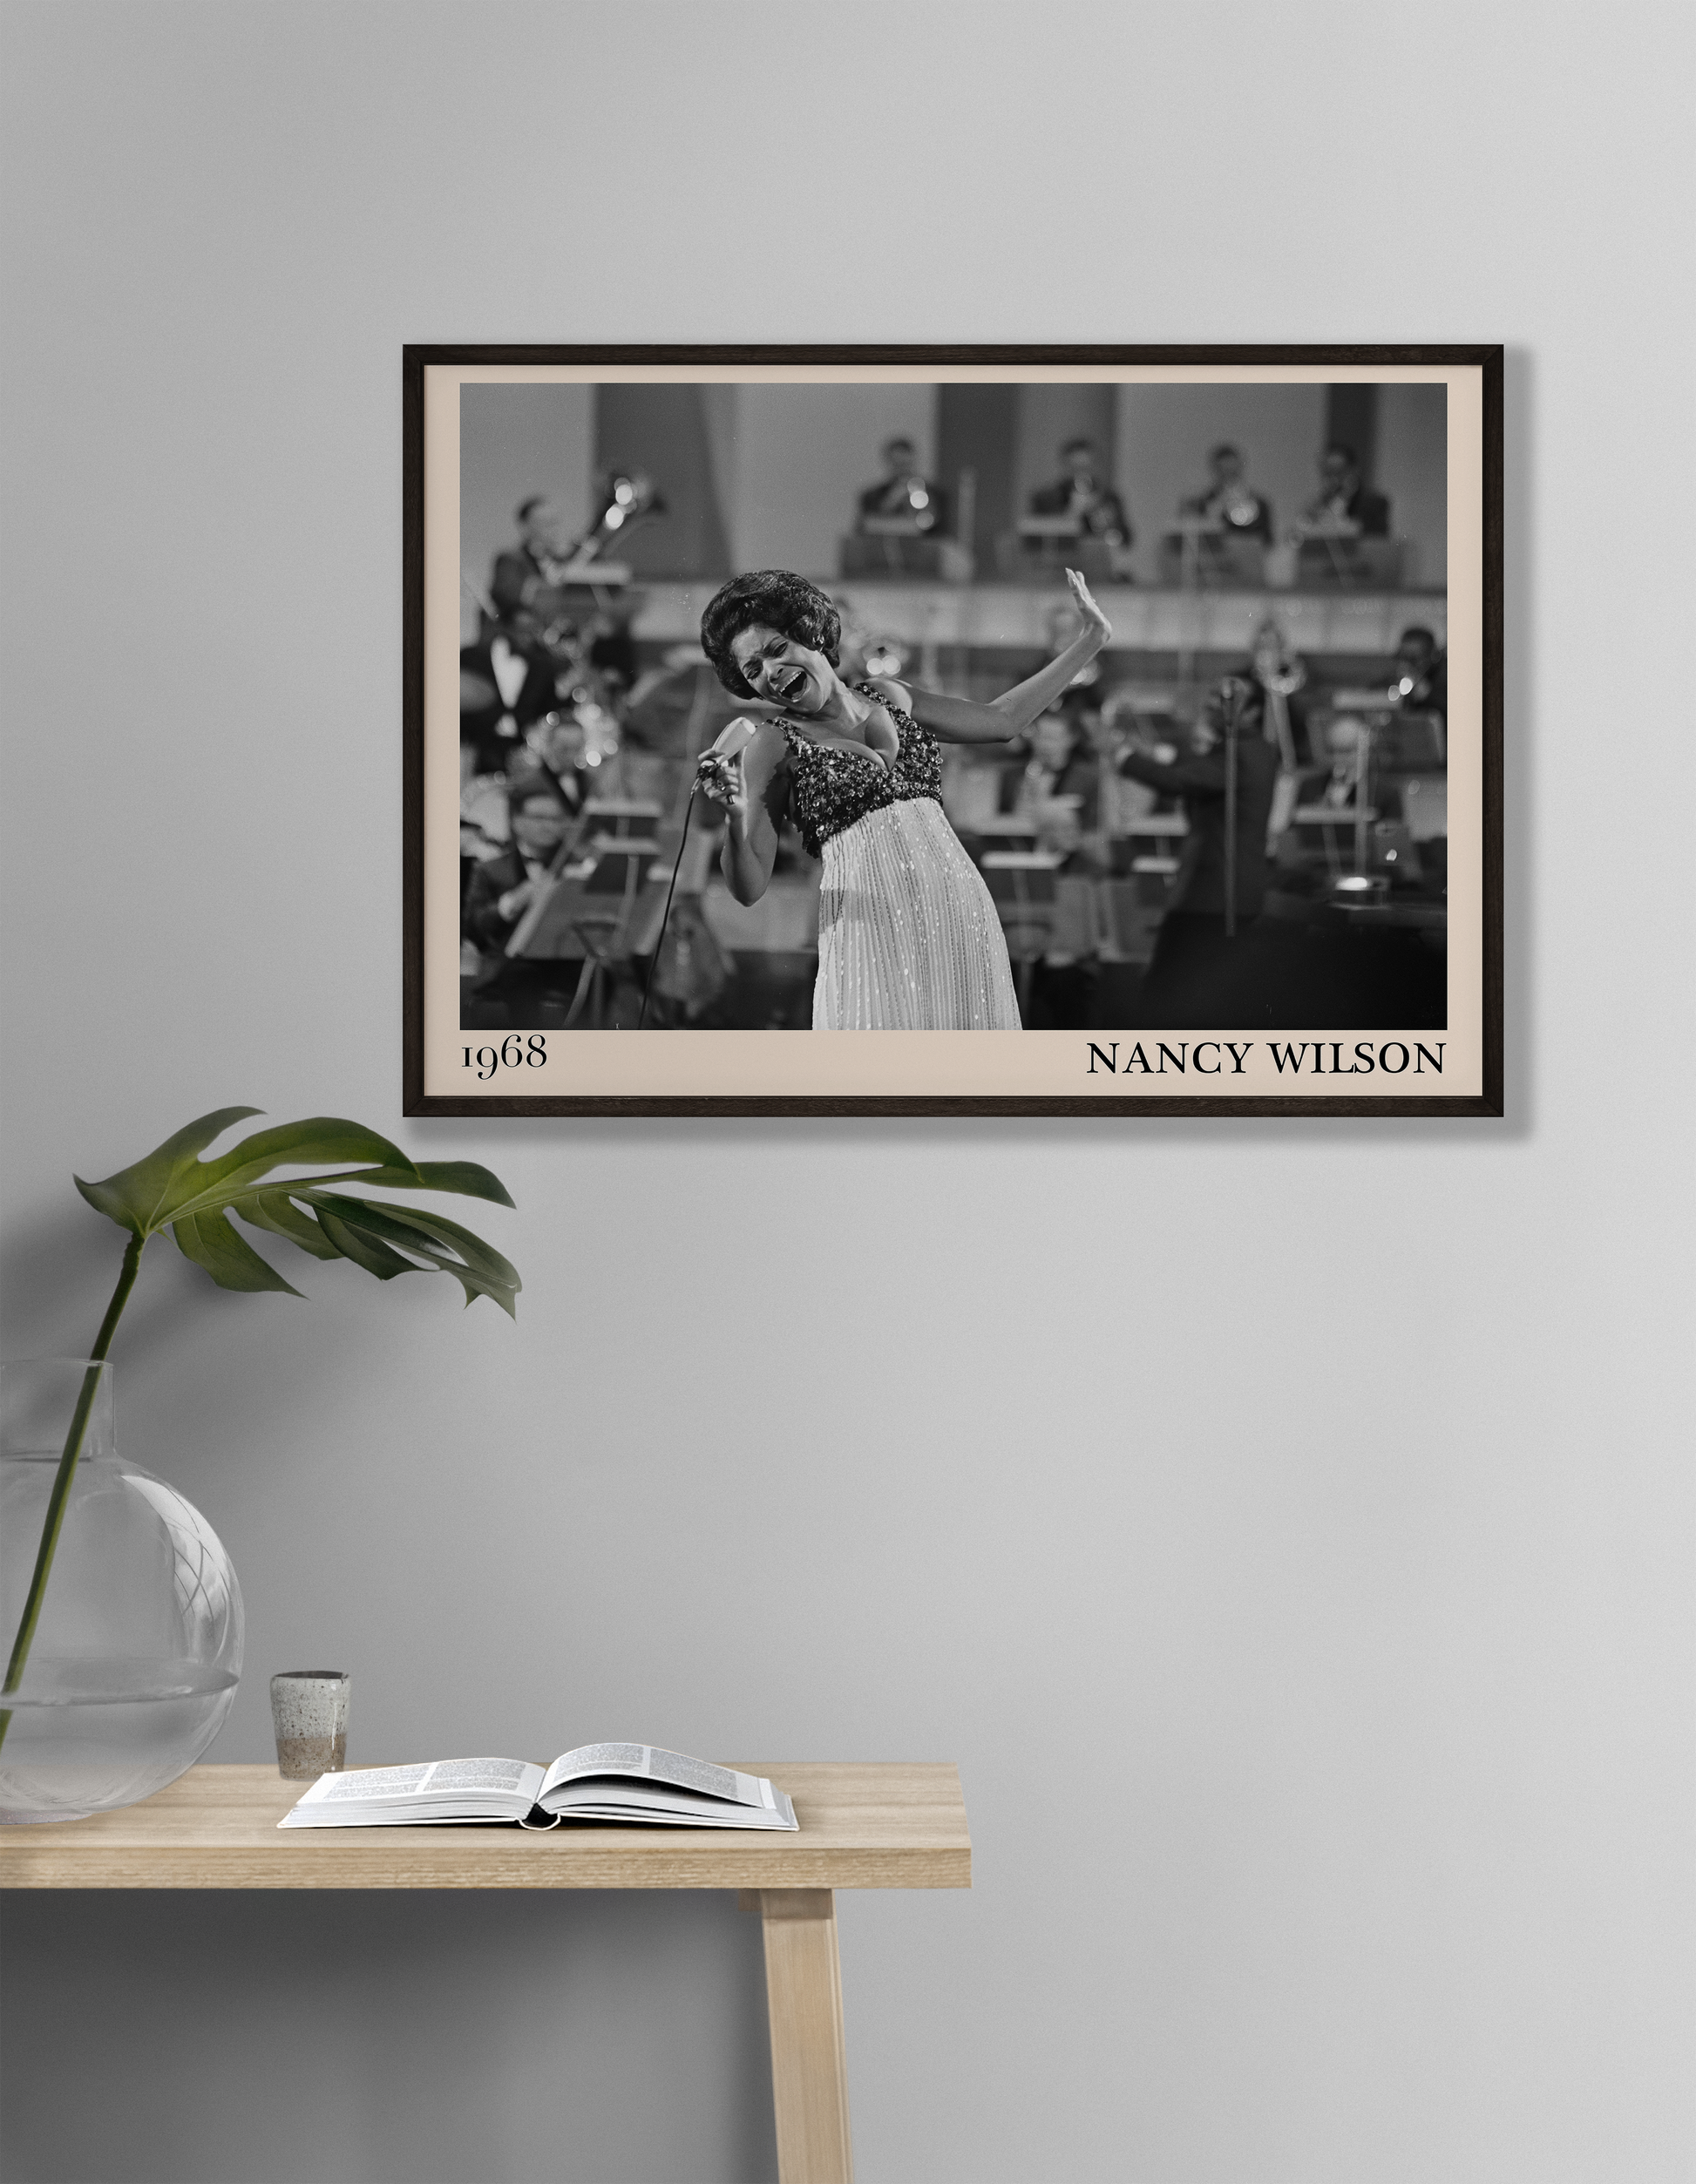 1968 picture of Nancy Wilson singing. Picture crafted into a cool black framed jazz print, with an off-white border. Poster is hanging on a grey living room wall